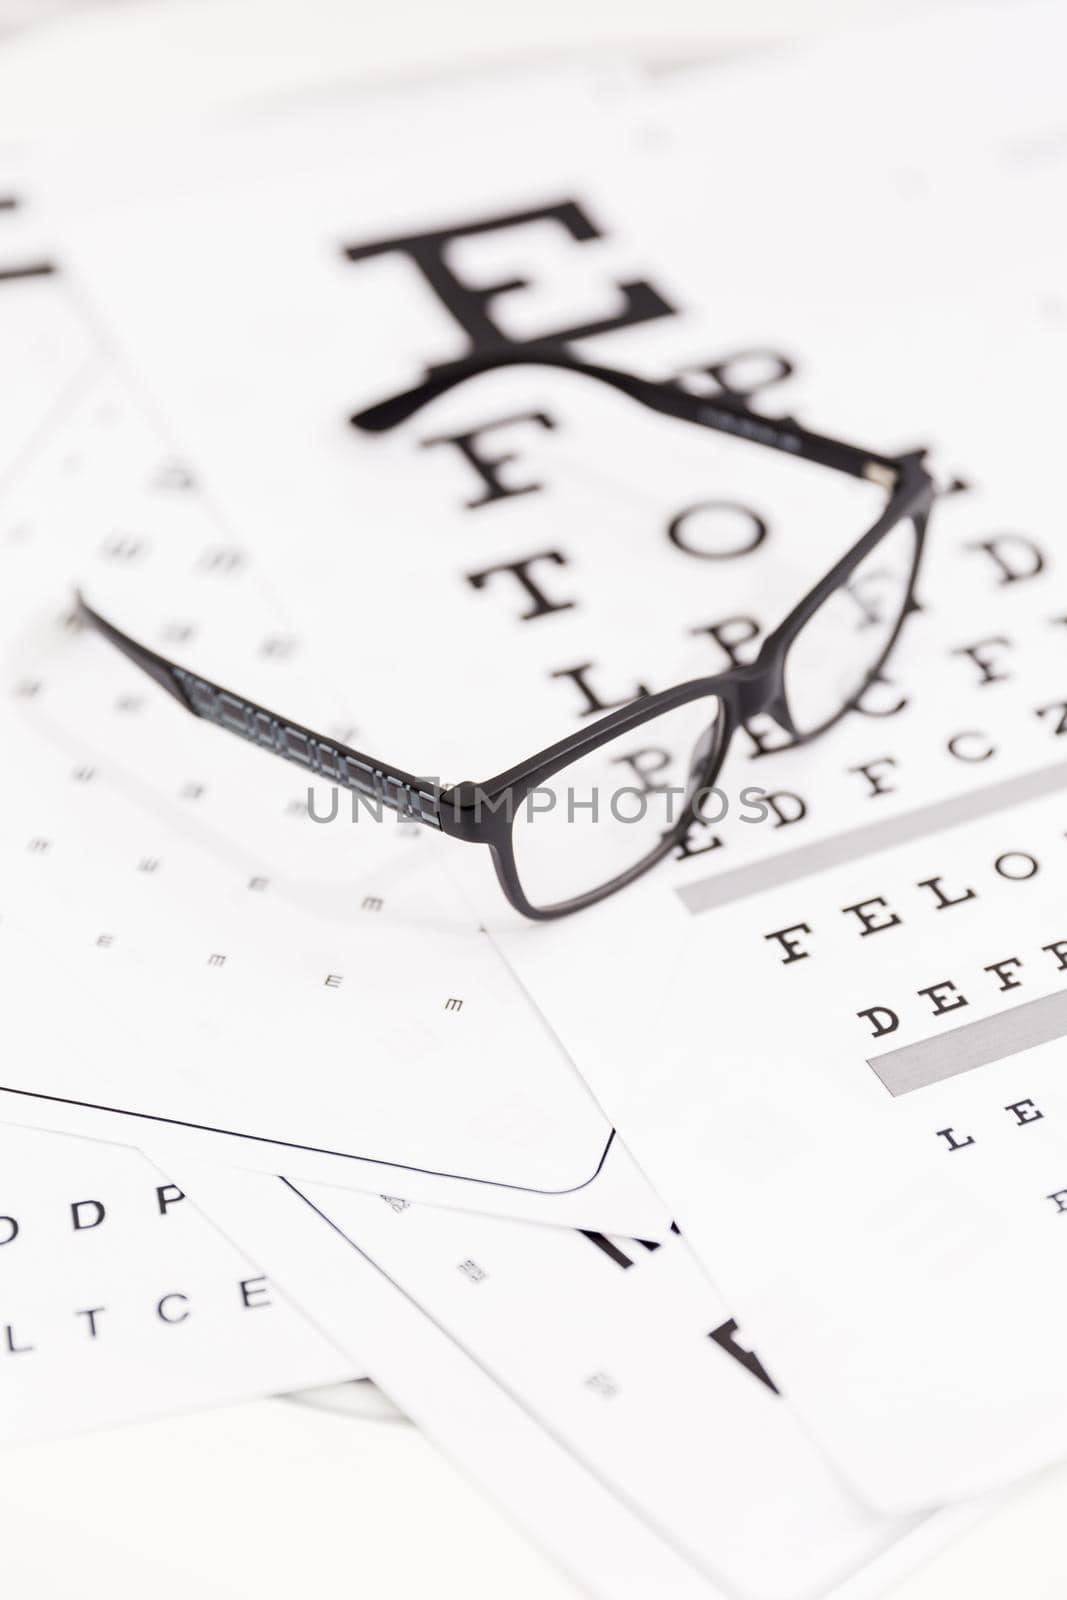 close up corrective spectacle snellen chart by Zahard